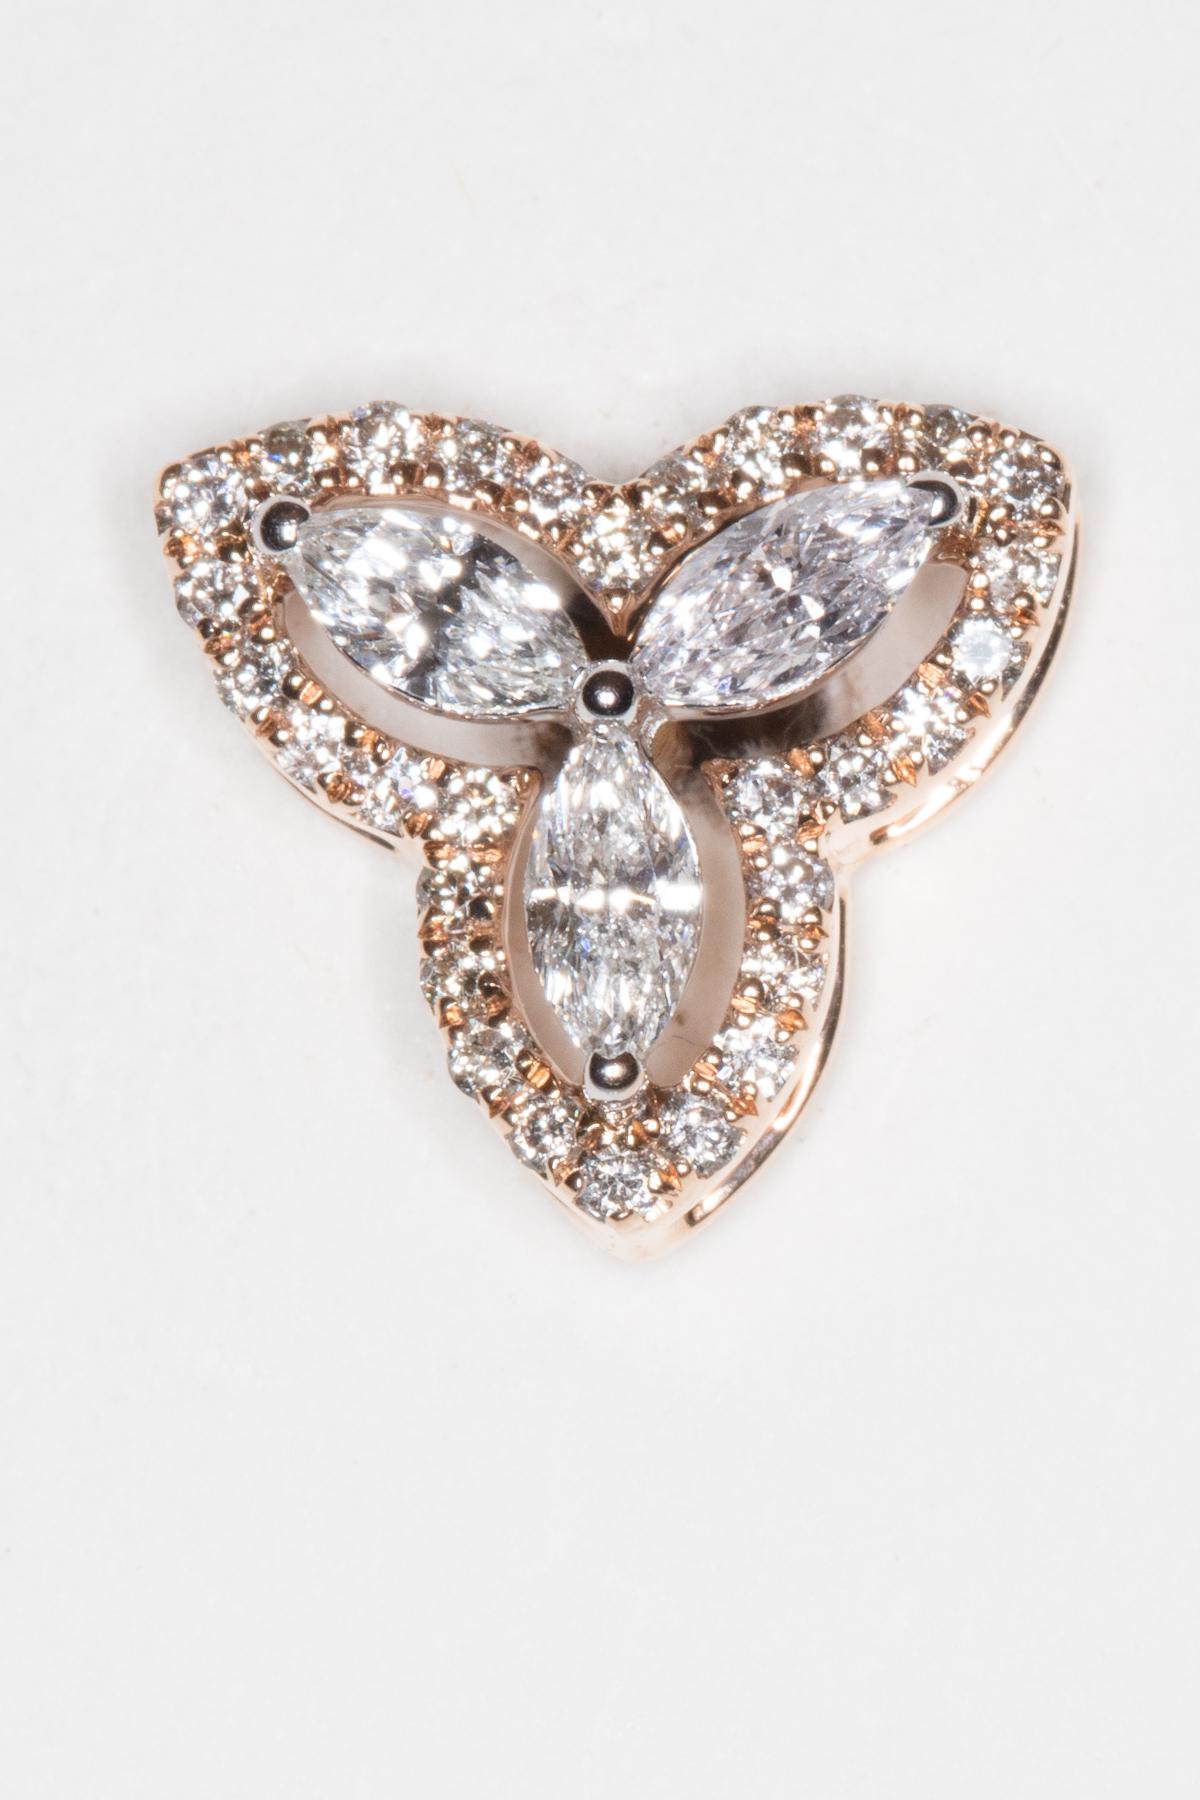 A cluster of three marquise cut diamonds bordered with pave`-set diamonds in an 18K rose gold.  Great color and clarity to the diamonds.  Carat weight unknown.  For pierced ears with screw backs.